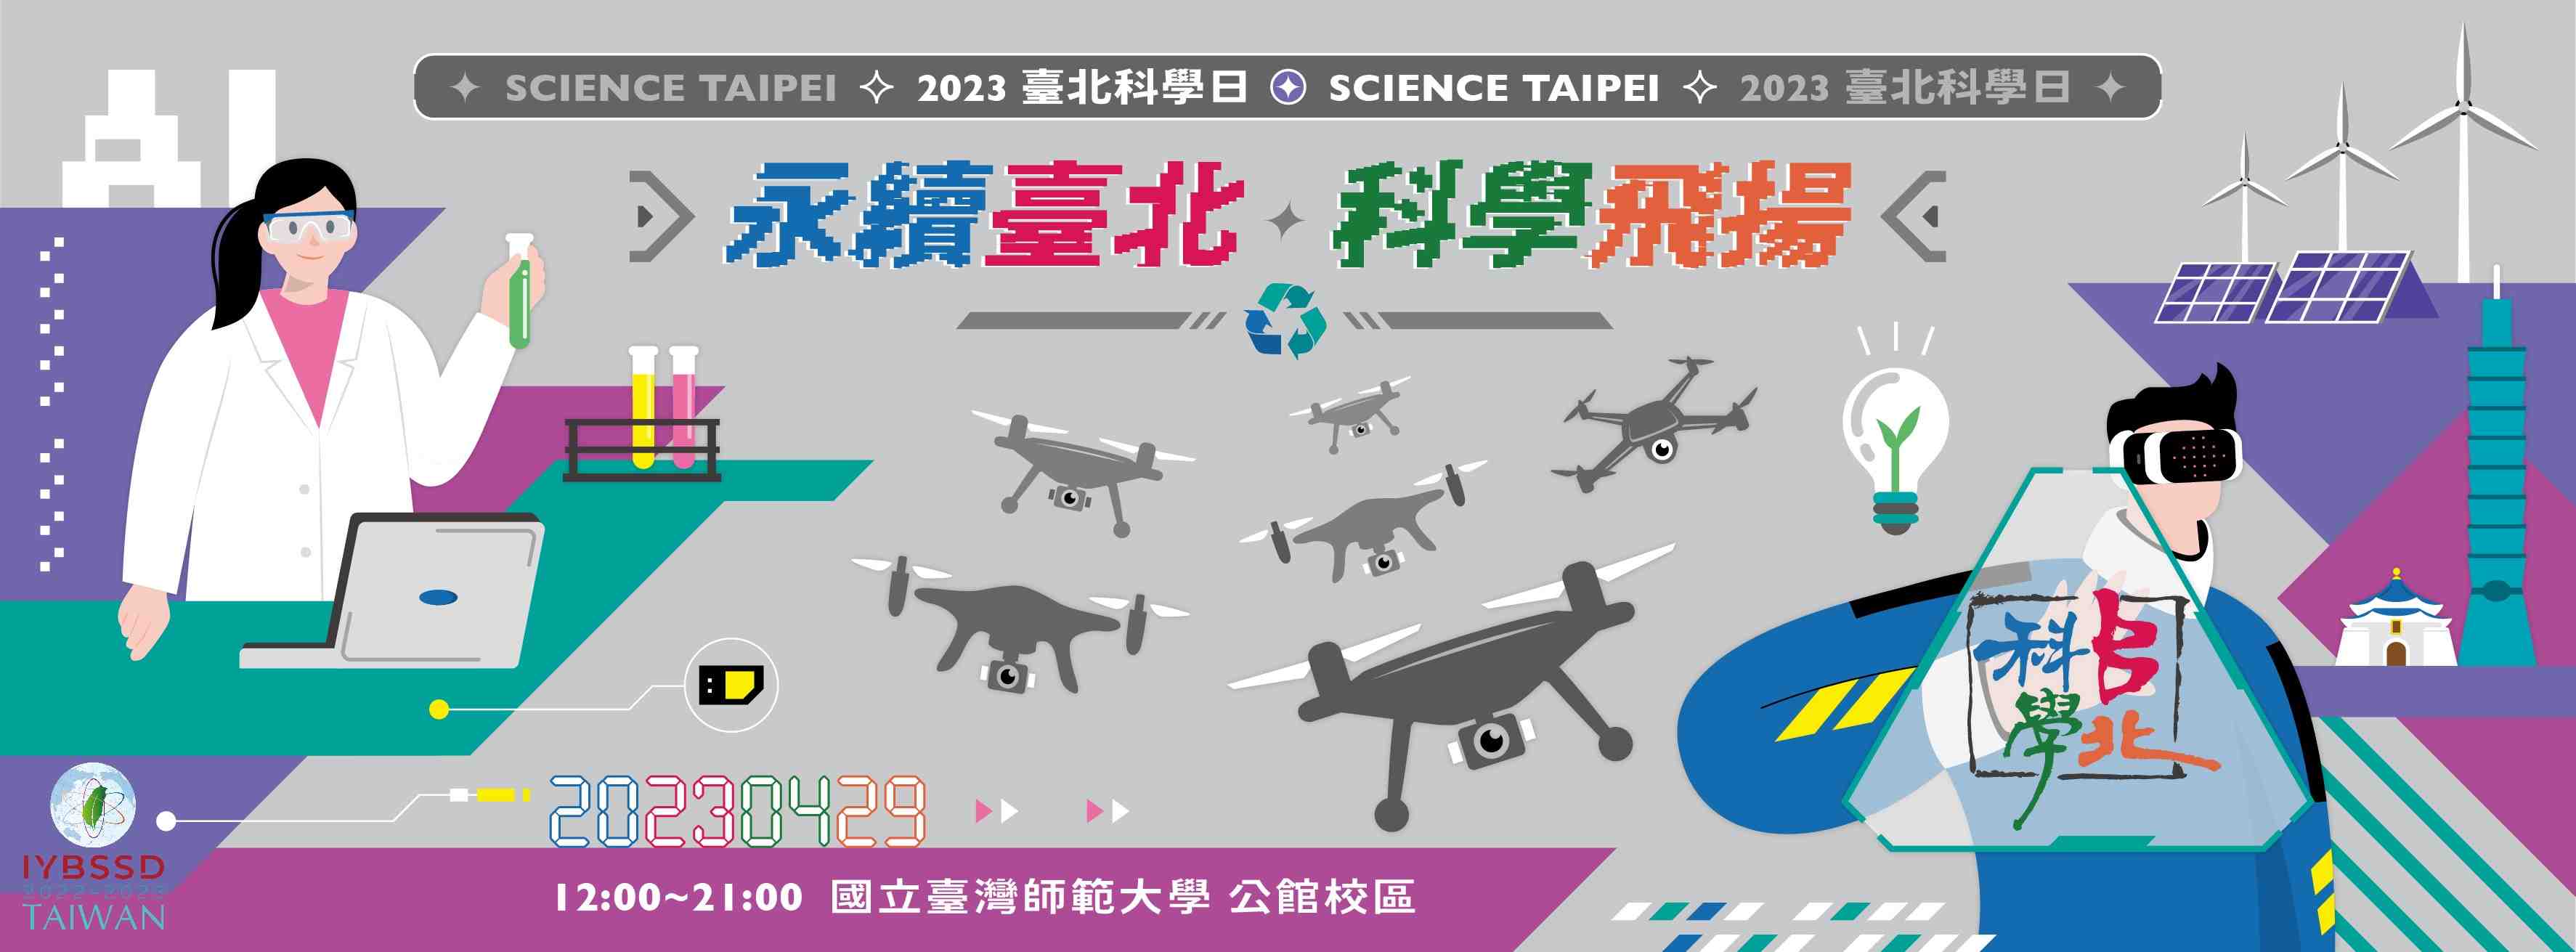 Wonderful Science Explore Together In Taipei Promotional Graphics or Posters